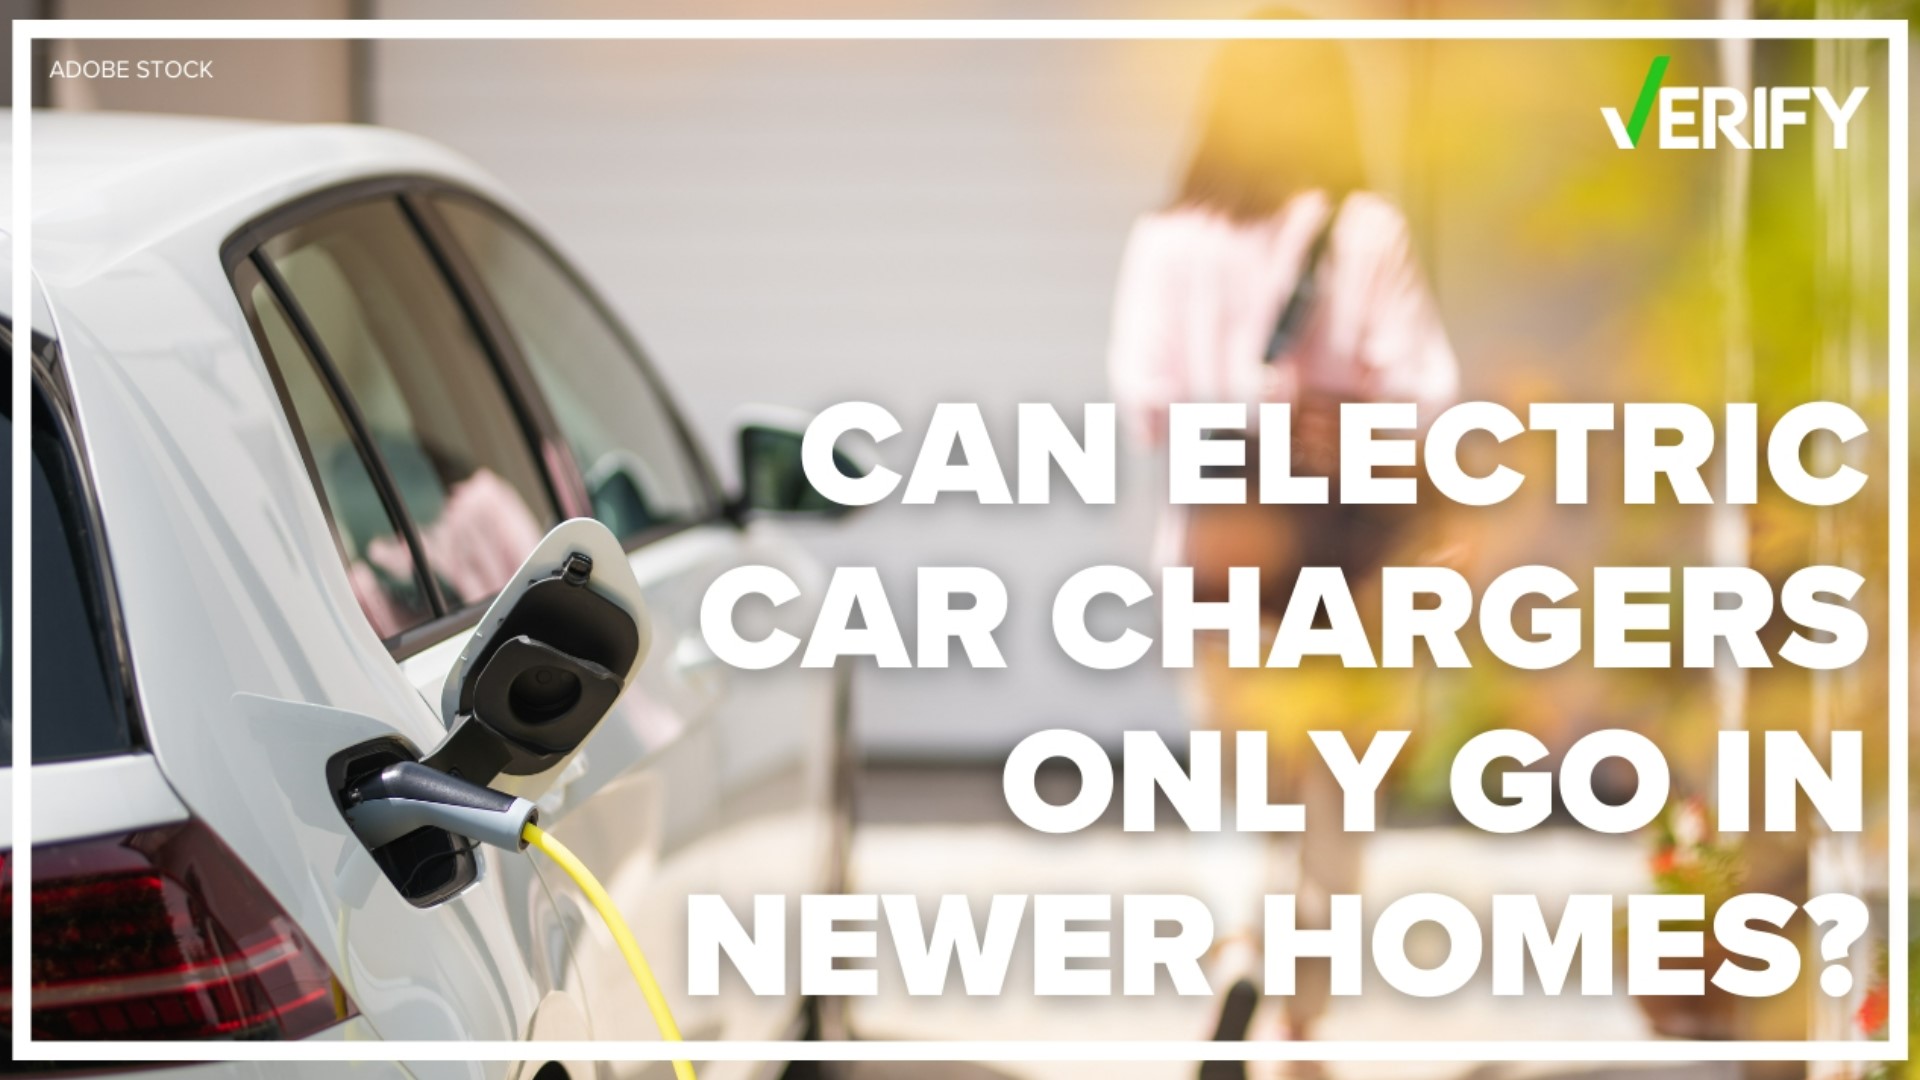 Electricians weigh several factors when determining how to install electric vehicle chargers